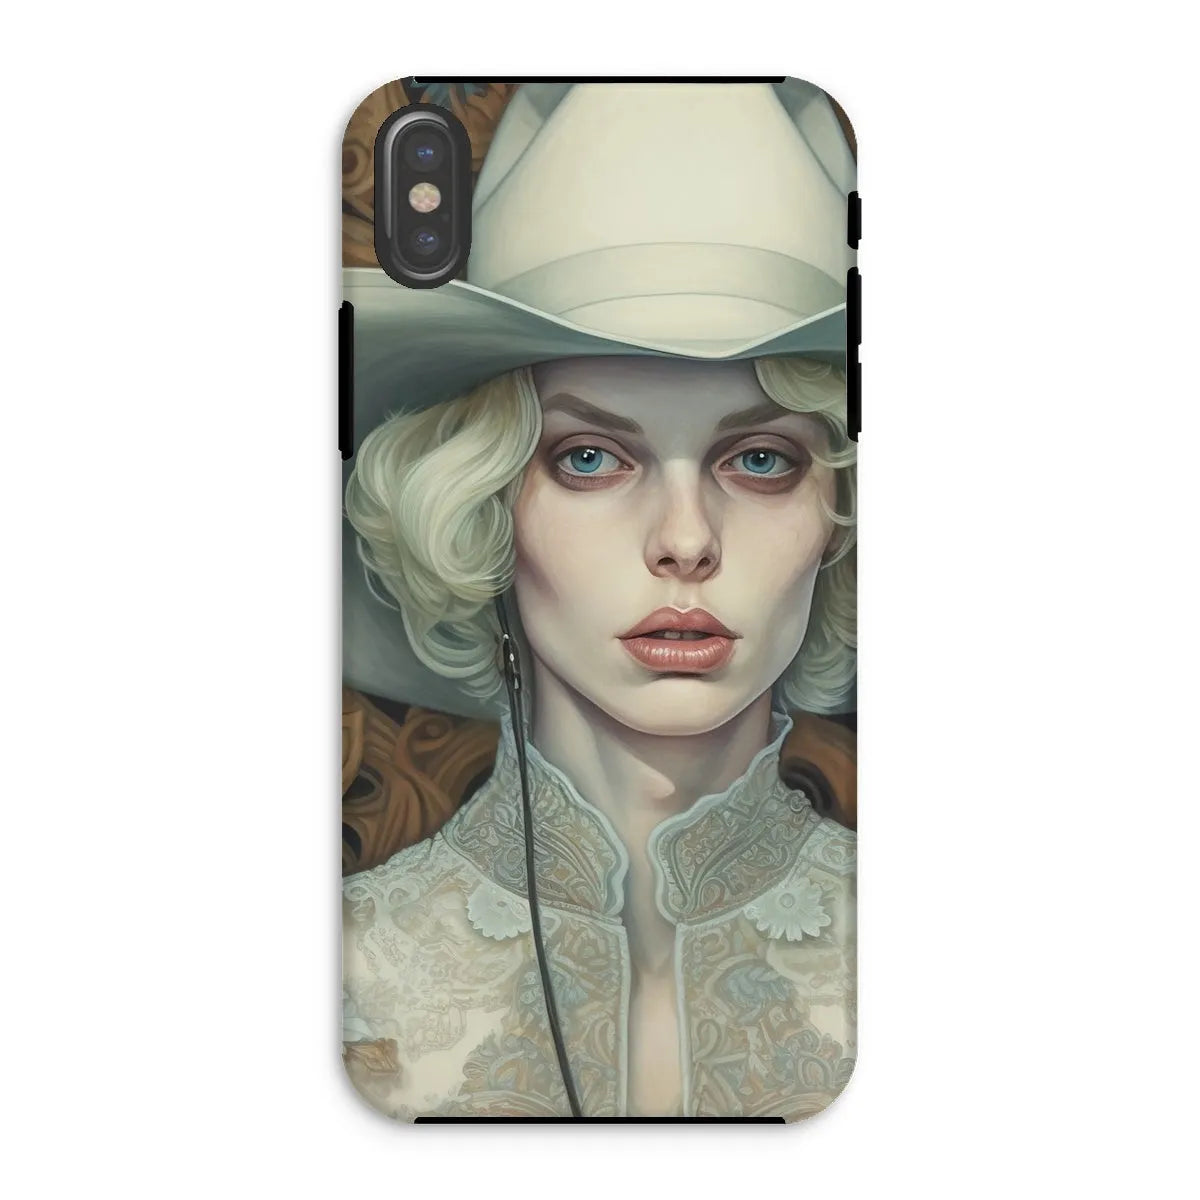 Winnie The Lesbian Cowgirl - Sapphic Art Phone Case - Iphone Xs / Matte - Mobile Phone Cases - Aesthetic Art